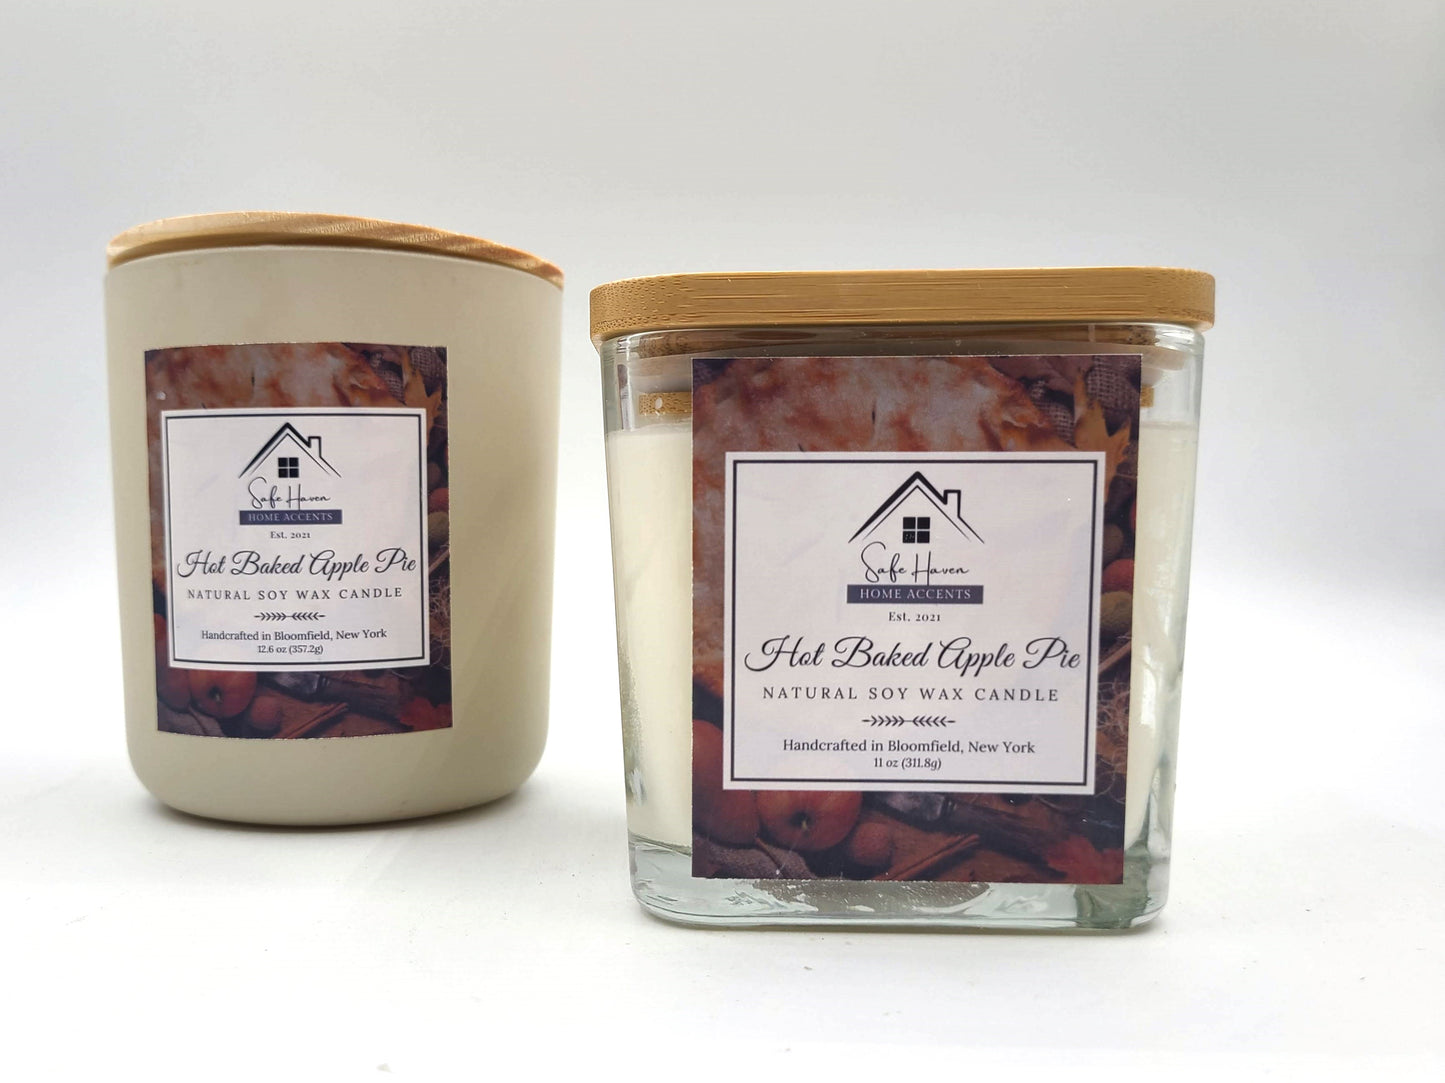 Hot Baked Apple Pie Natural Soy Wax Candle